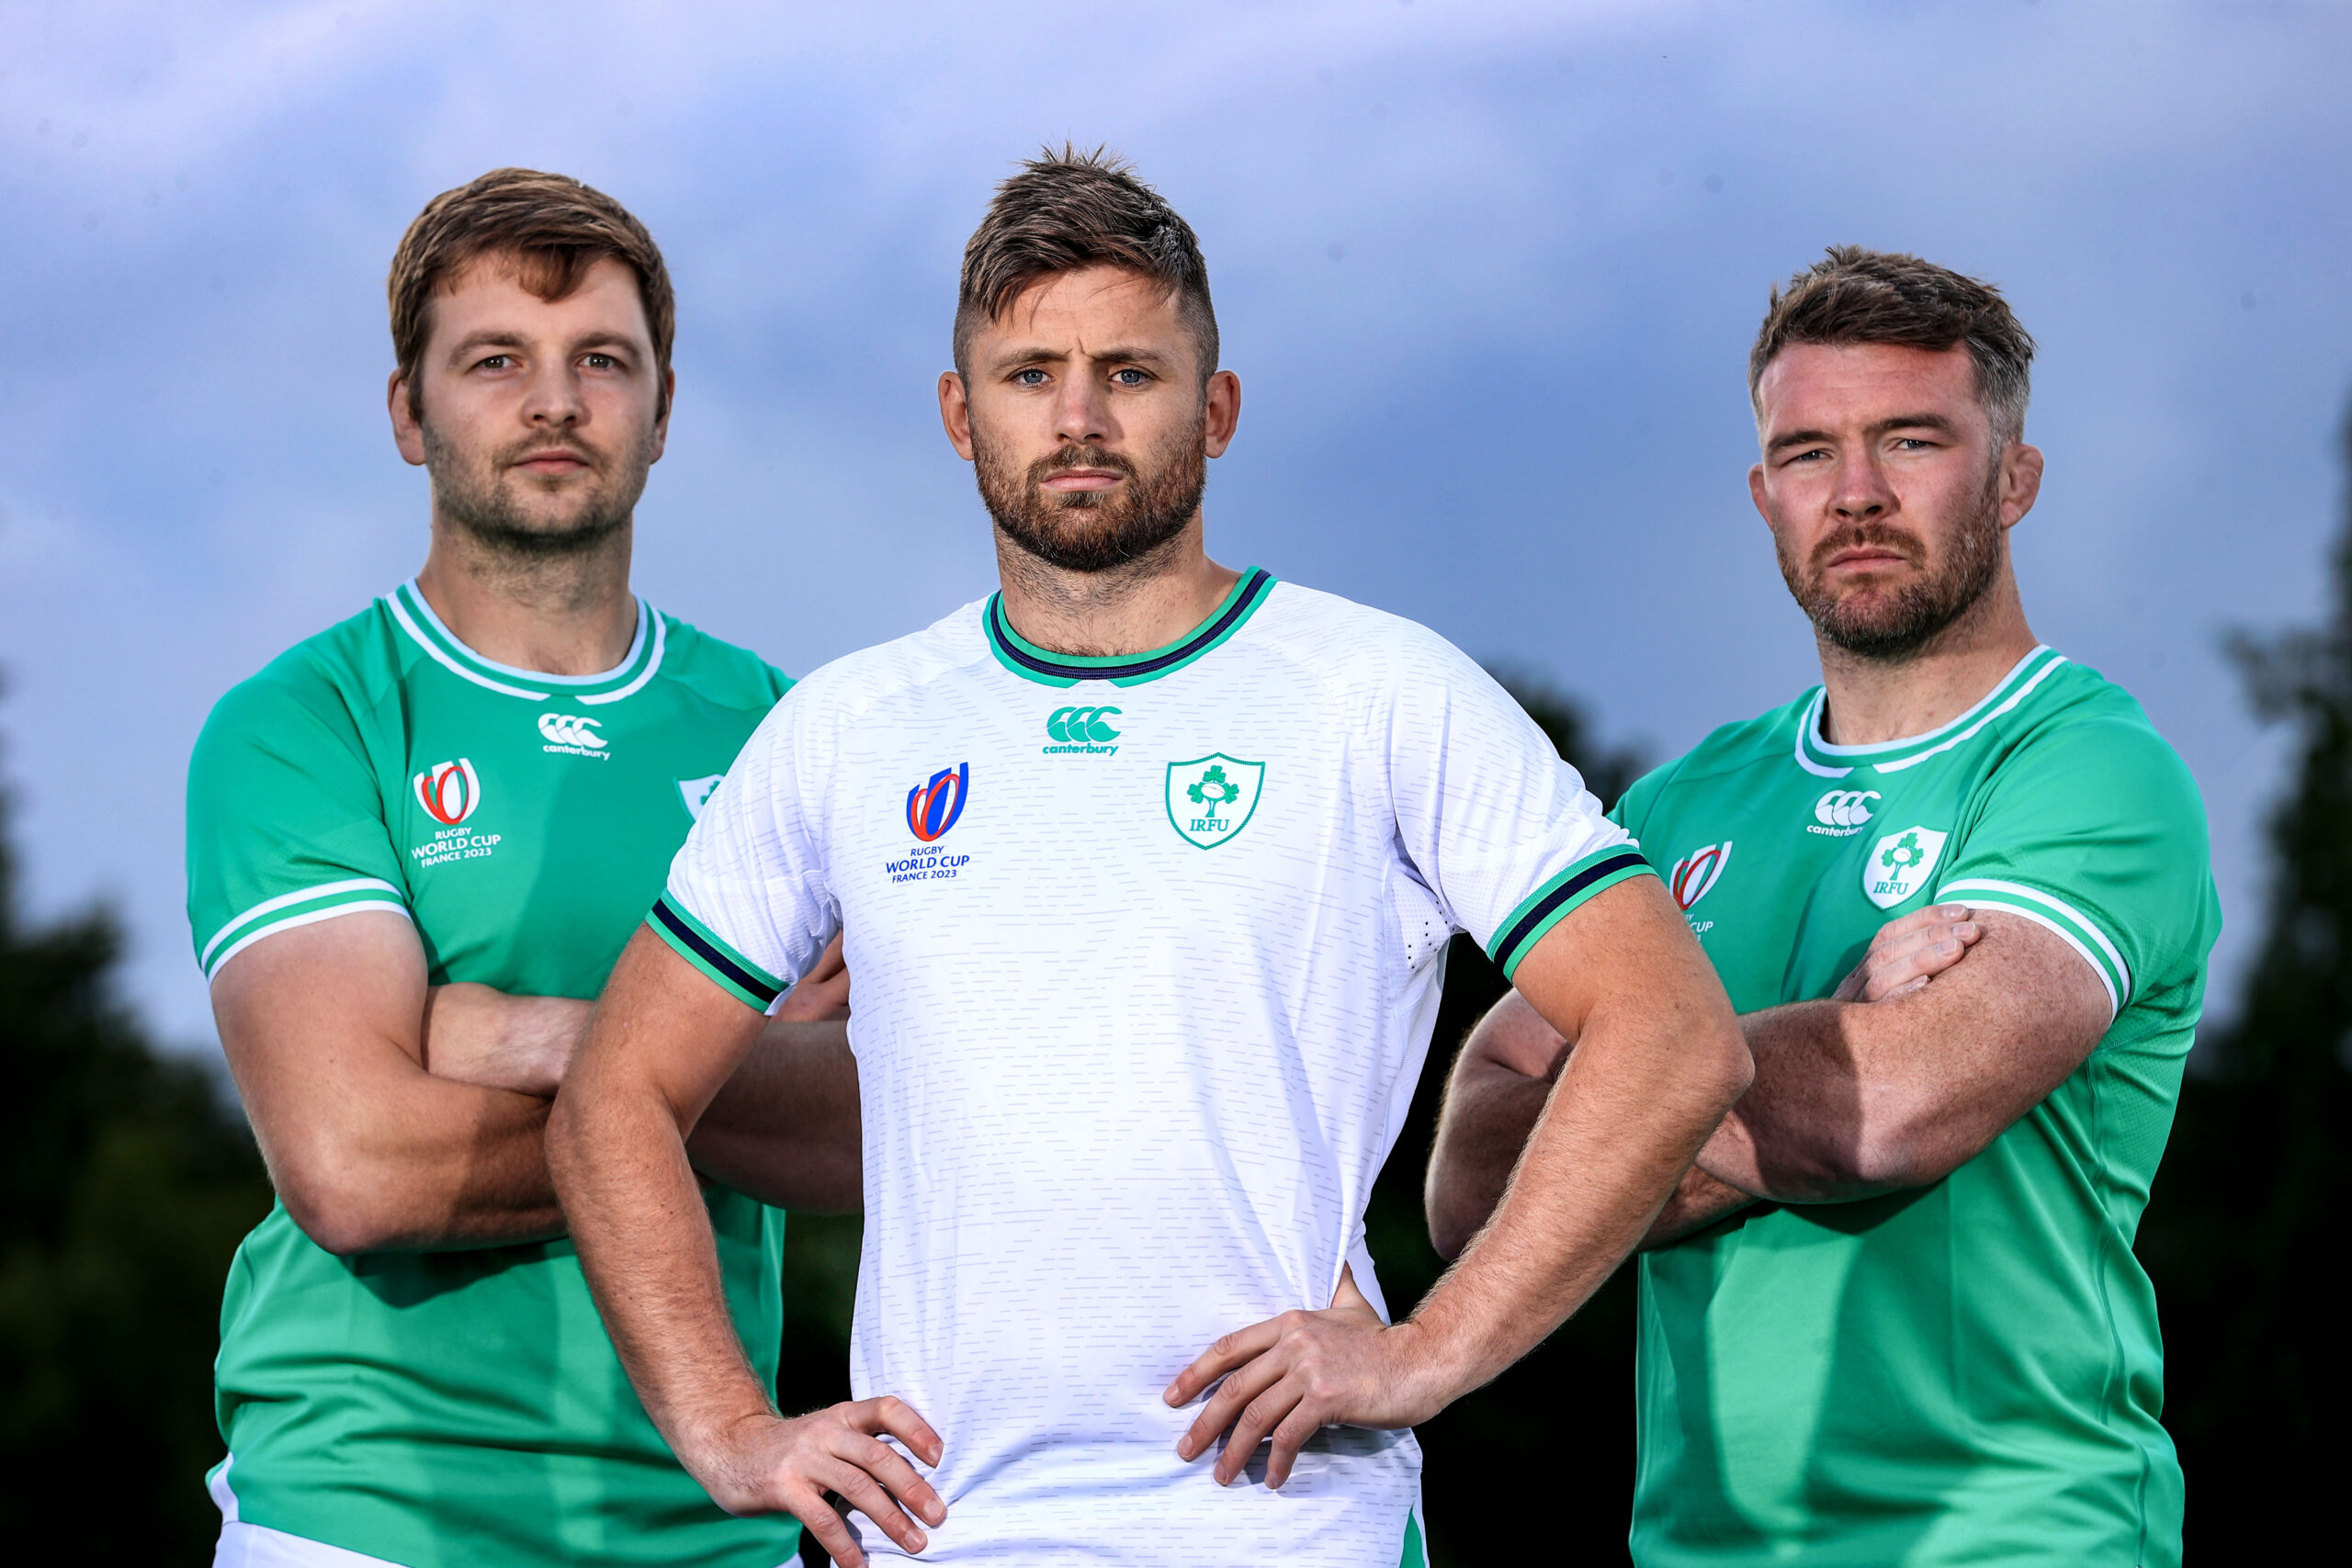 Canterbury reveals the new Irish home and alternate jerseys that will be worn by the team at the upcoming Rugby World Cup.